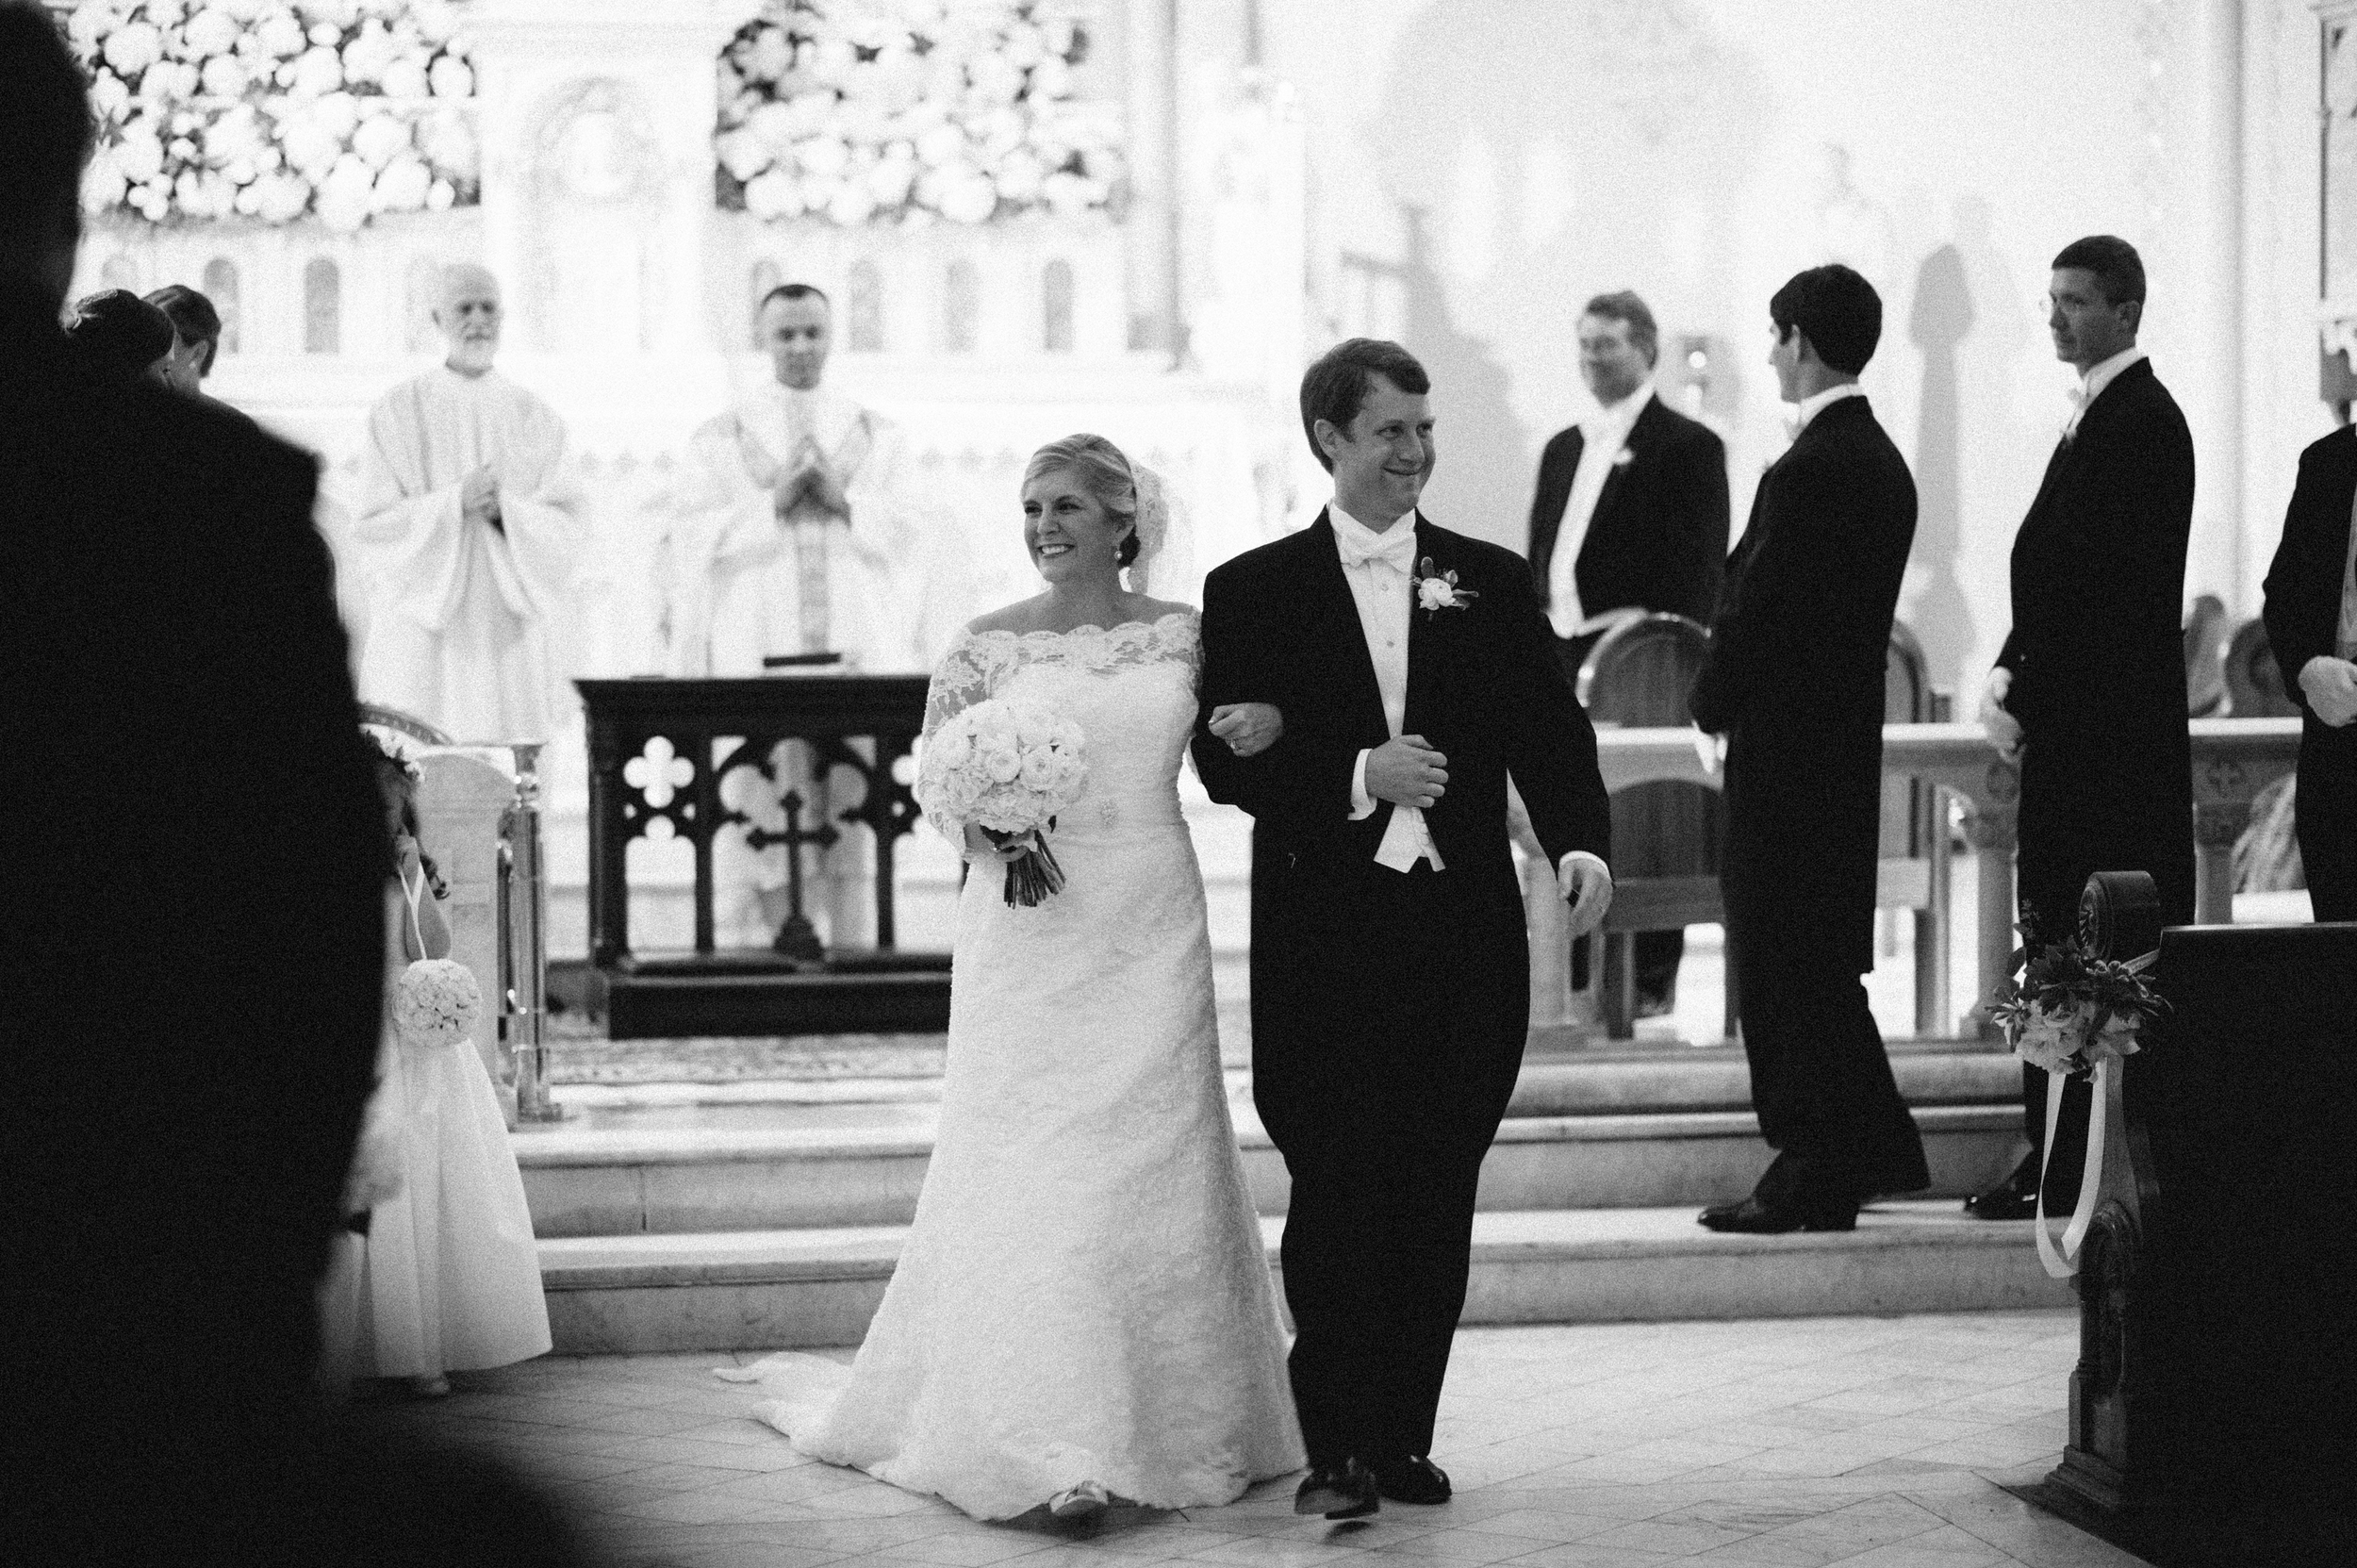 Wedding Ceremony at Church of the Most Holy Trinity | Greg Boulus Events, Augusta GA.